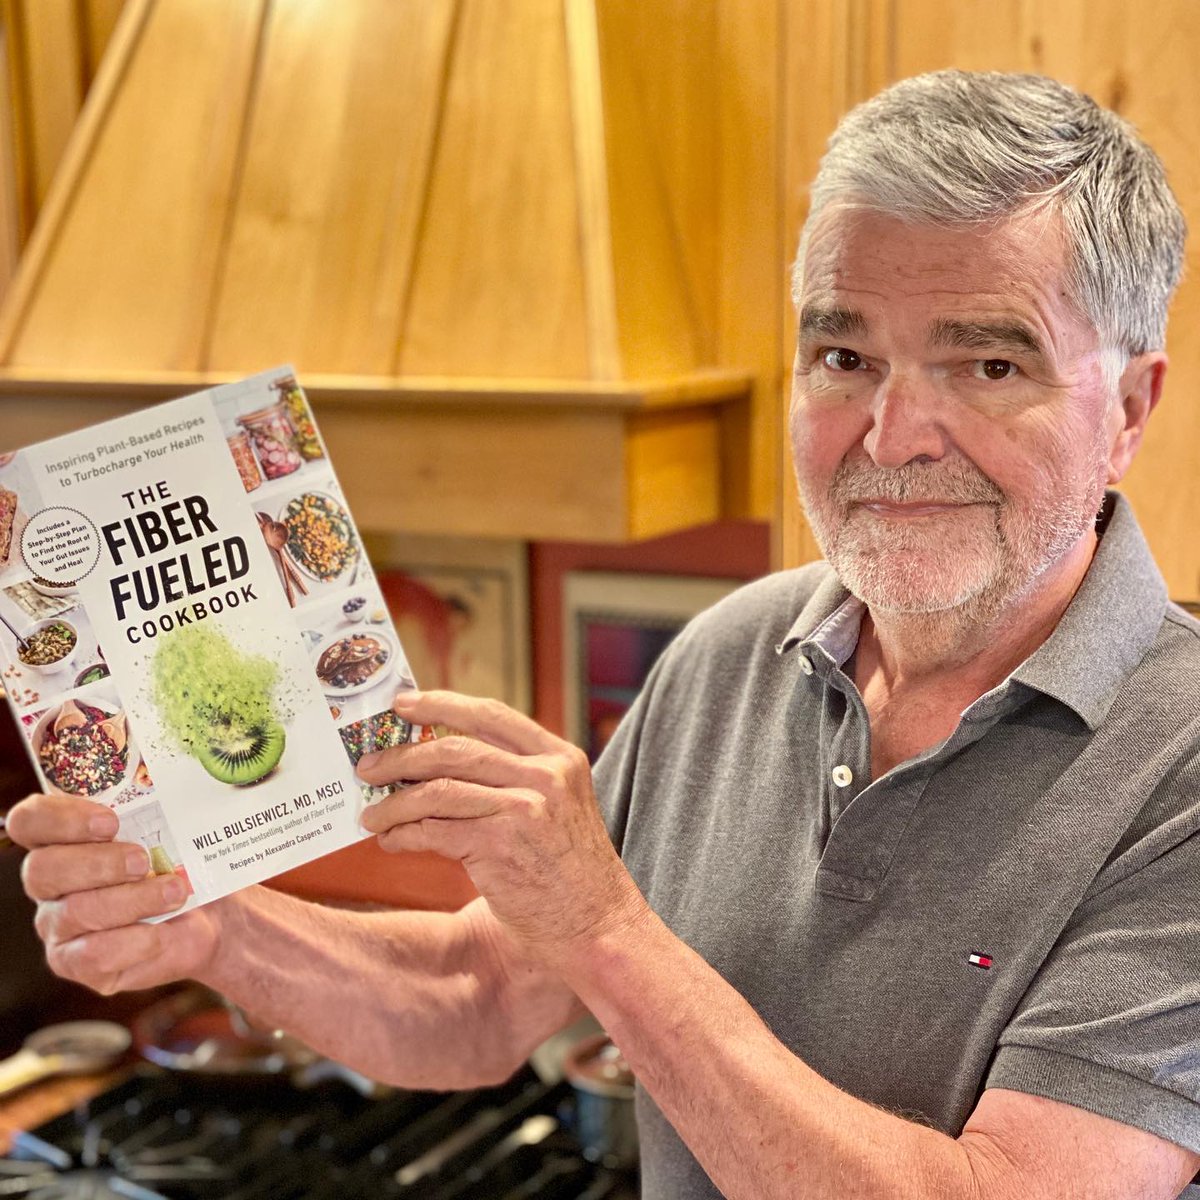 If you have never looked at a cookbook, my friend Will Bulsiewicz’s new Fiber Fueled Cookbook is the one you have to pay attention to. #cookbook #vegan #healthyfoods